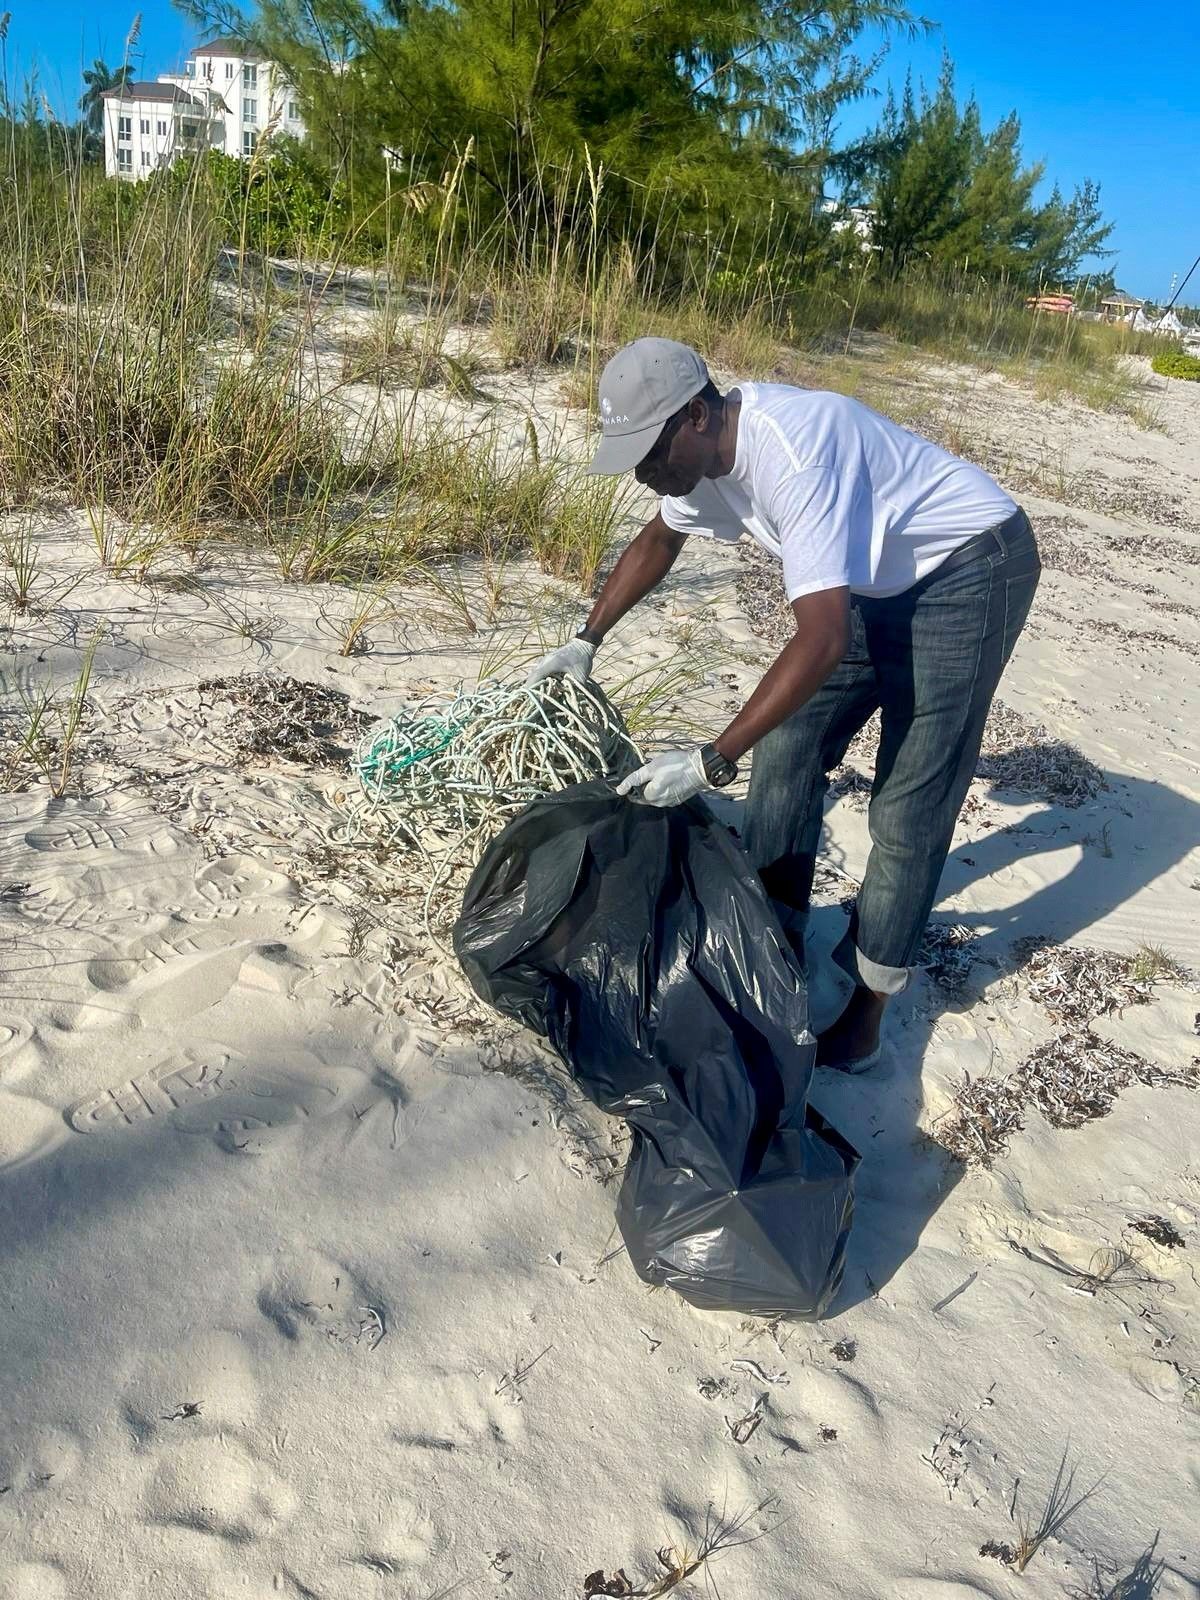 A man is picking up trash on a beach.